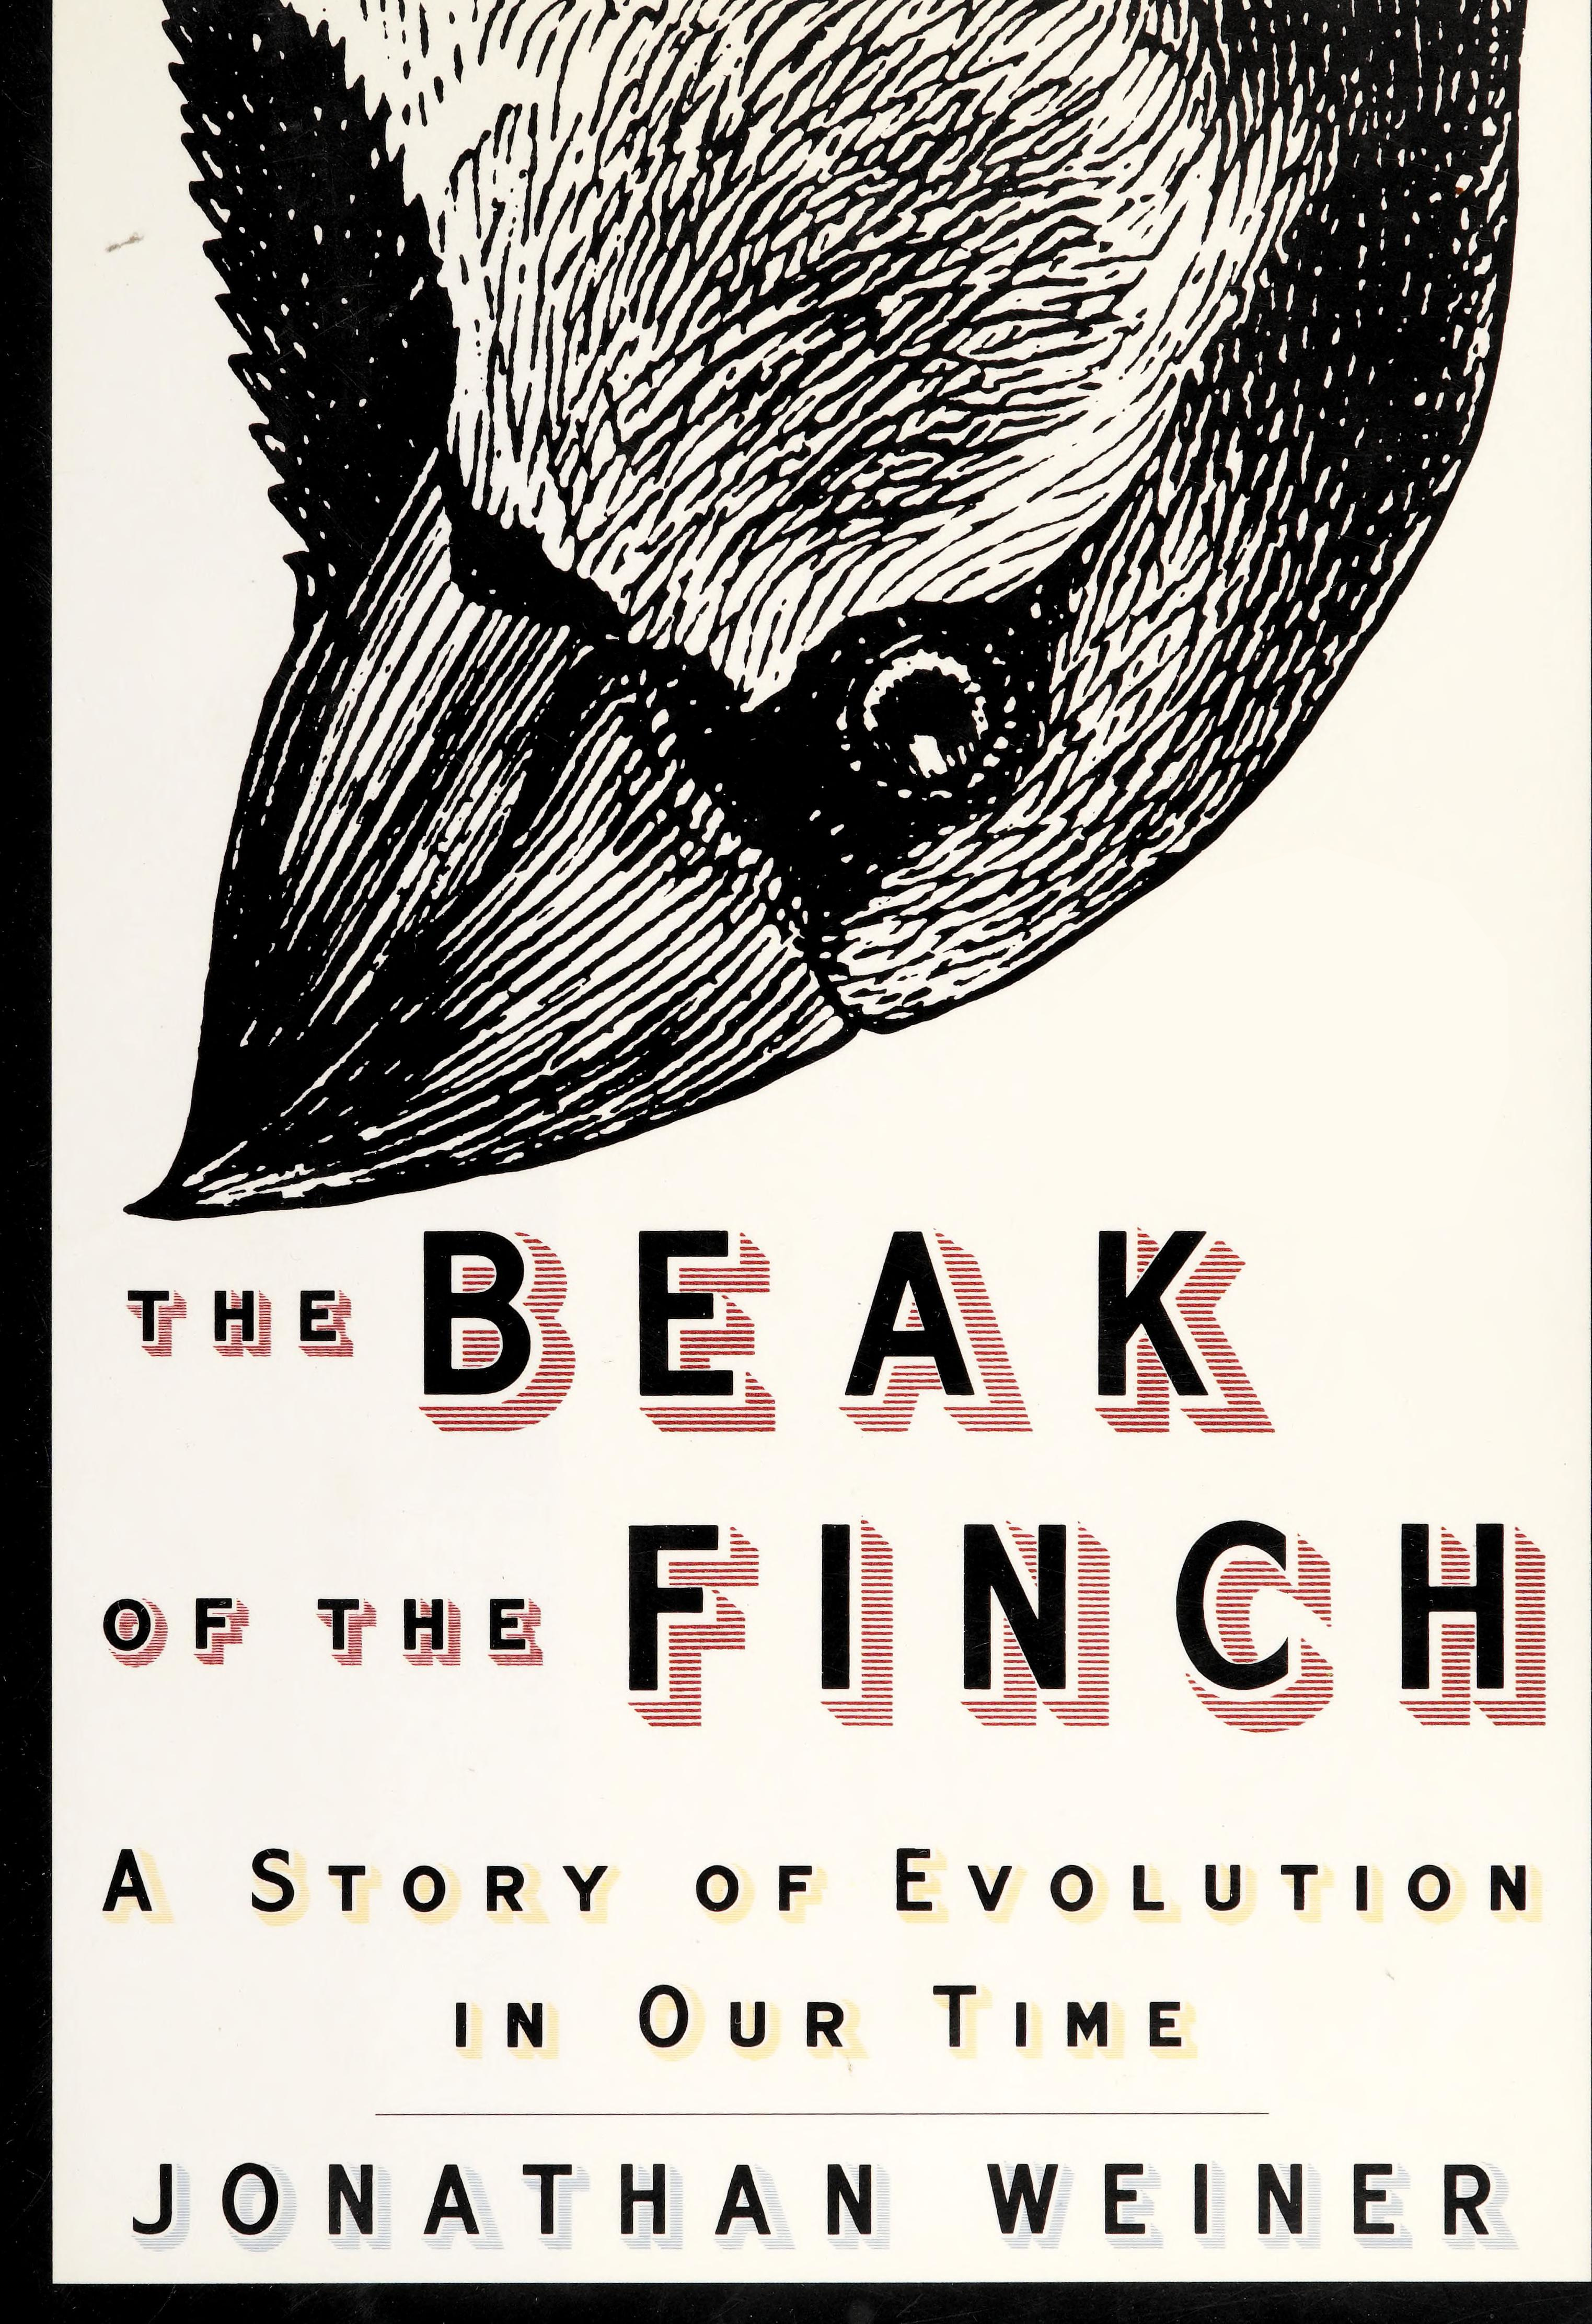 Jonathan Weiner: The Beak Of The Finch (Hardcover, 1994, Alfred A. Knopf)